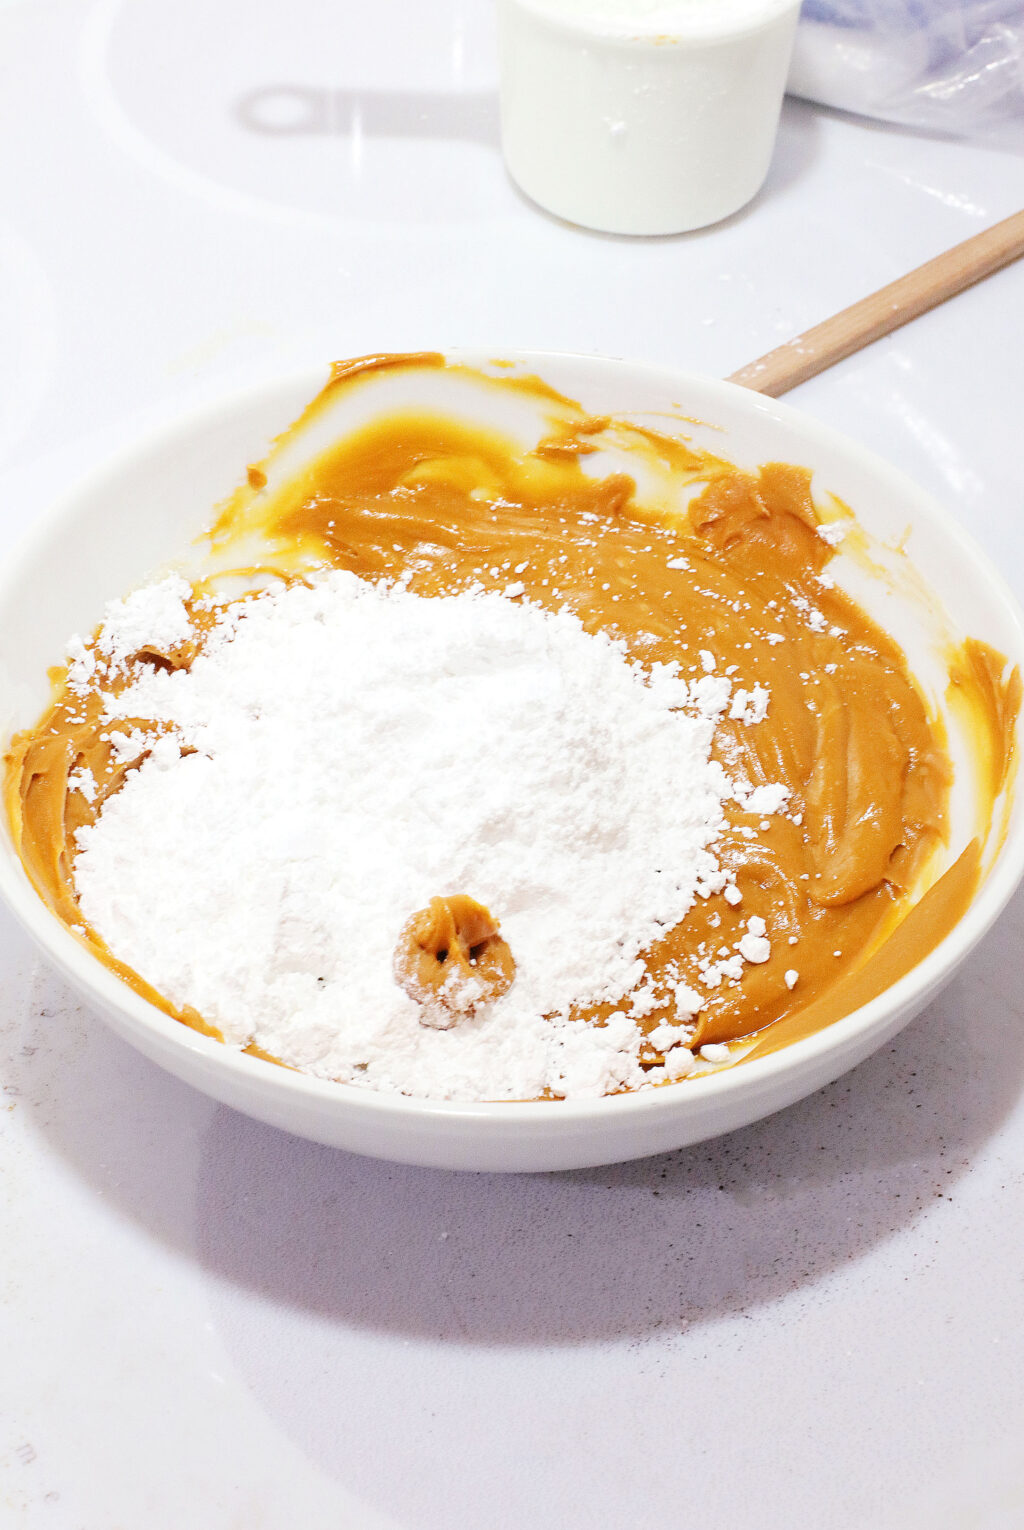 powdered sugar and peanut butter in large white mixing bowl